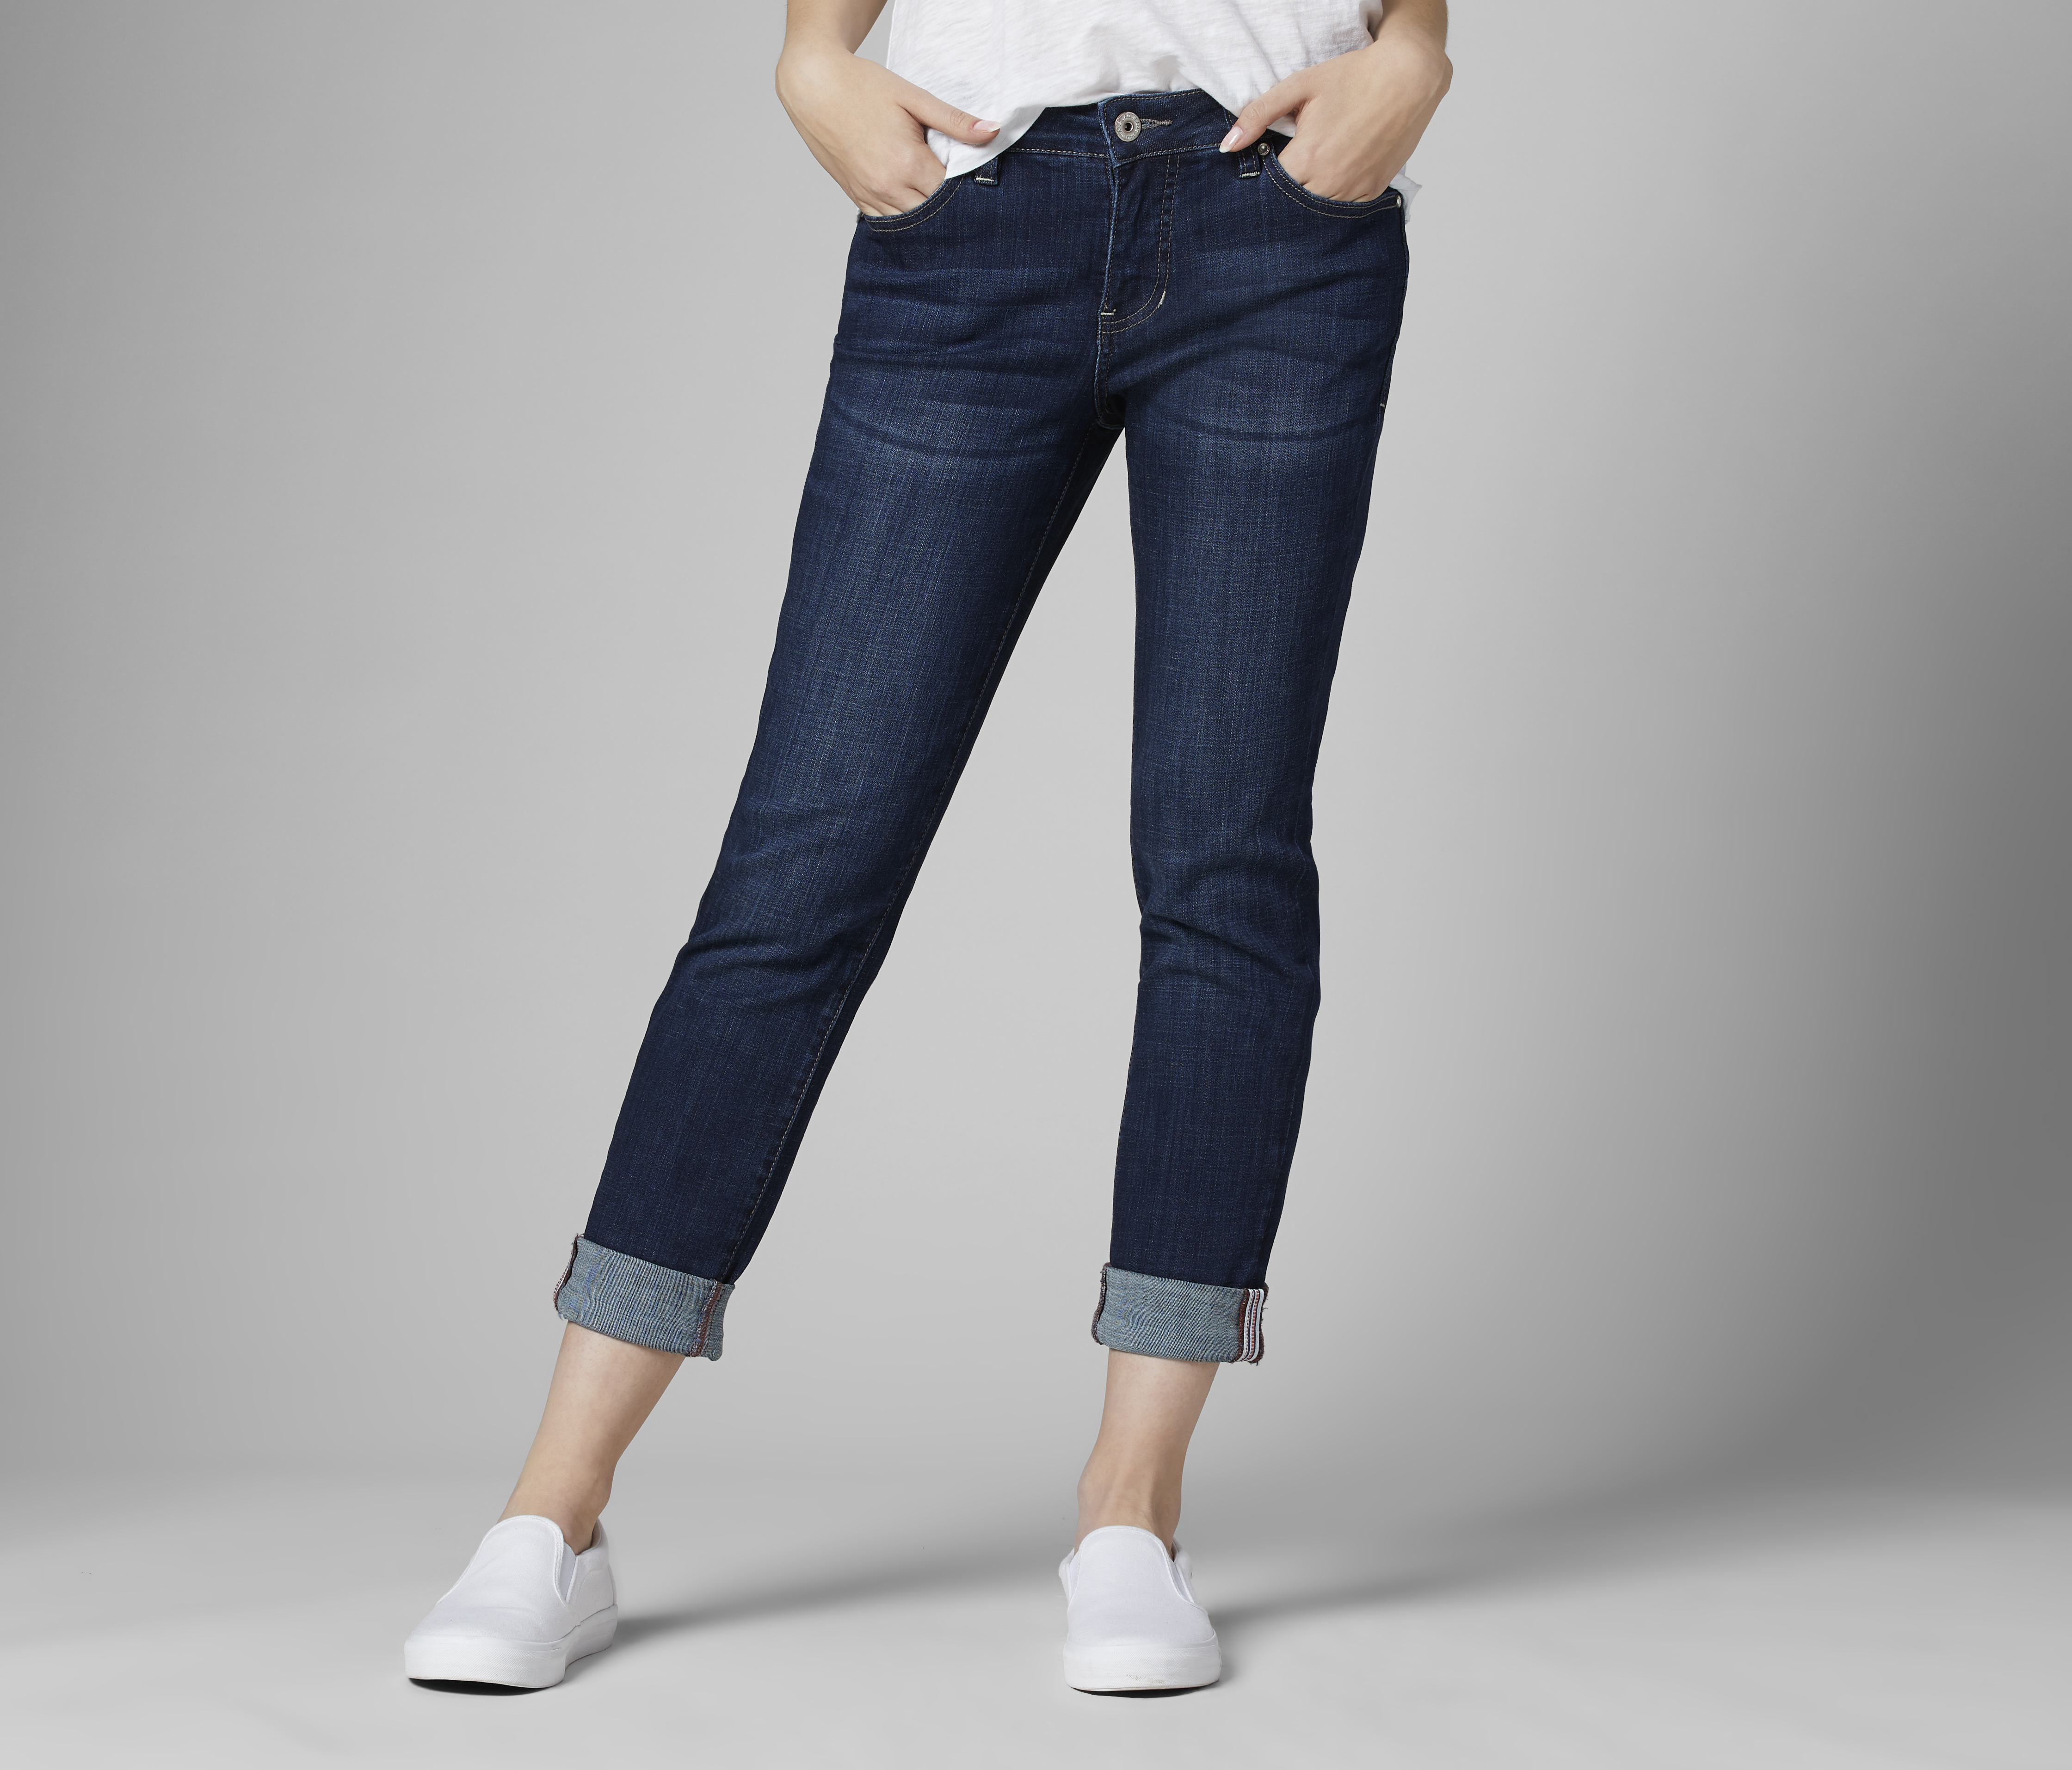 Carter Mid Rise Girlfriend Jeans - Jag 